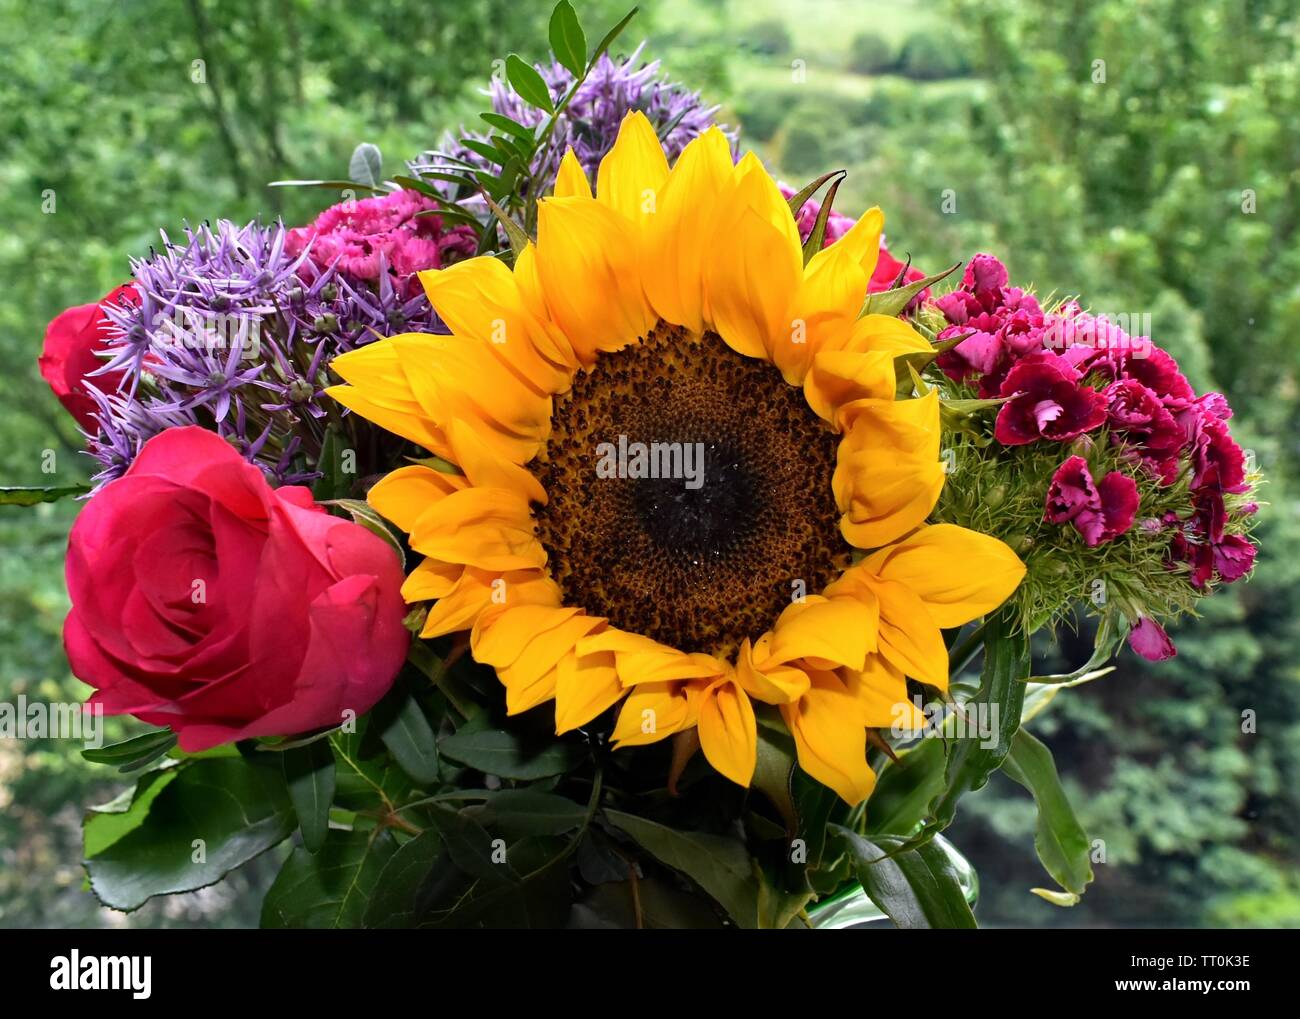 Floral display of sweet Williams, allium, roses with a sunflower. Stock Photo